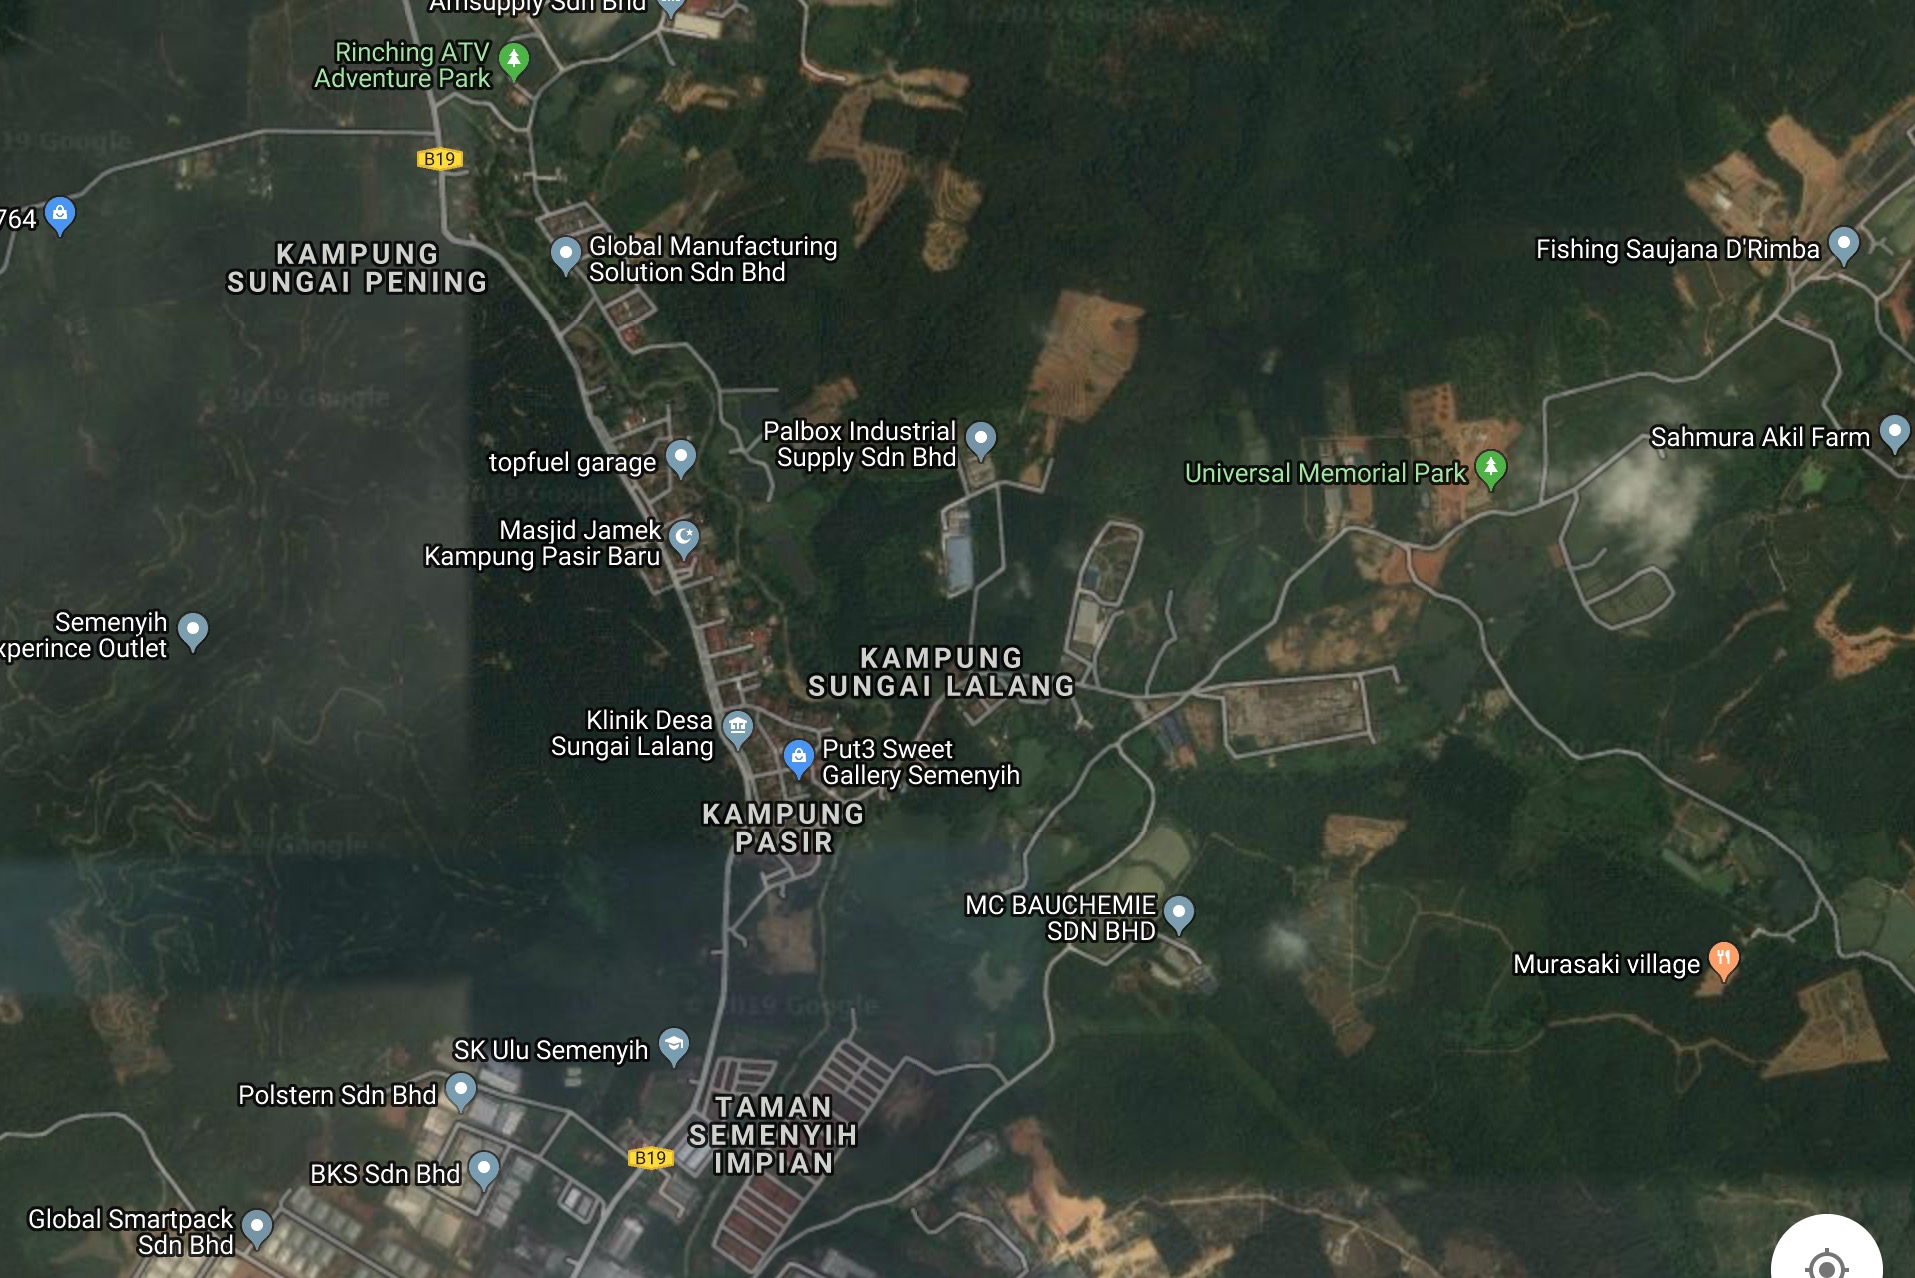 Land for sale and to lease In Malaysia - Malaysiapropertys.com